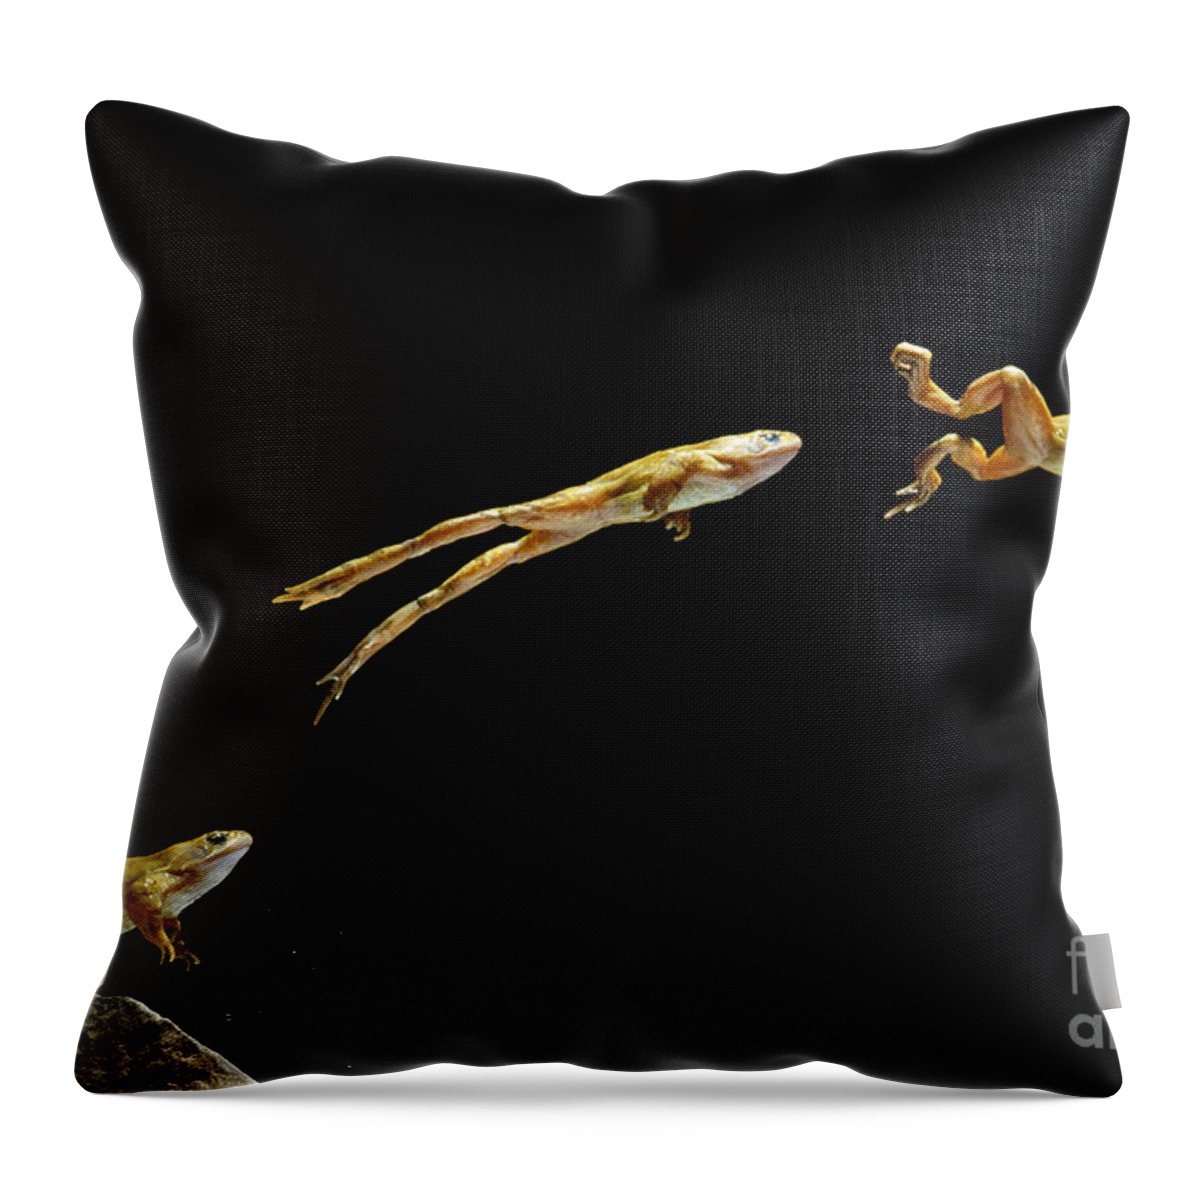 Animal Throw Pillow featuring the photograph Common Frog Leaping by Stephen Dalton